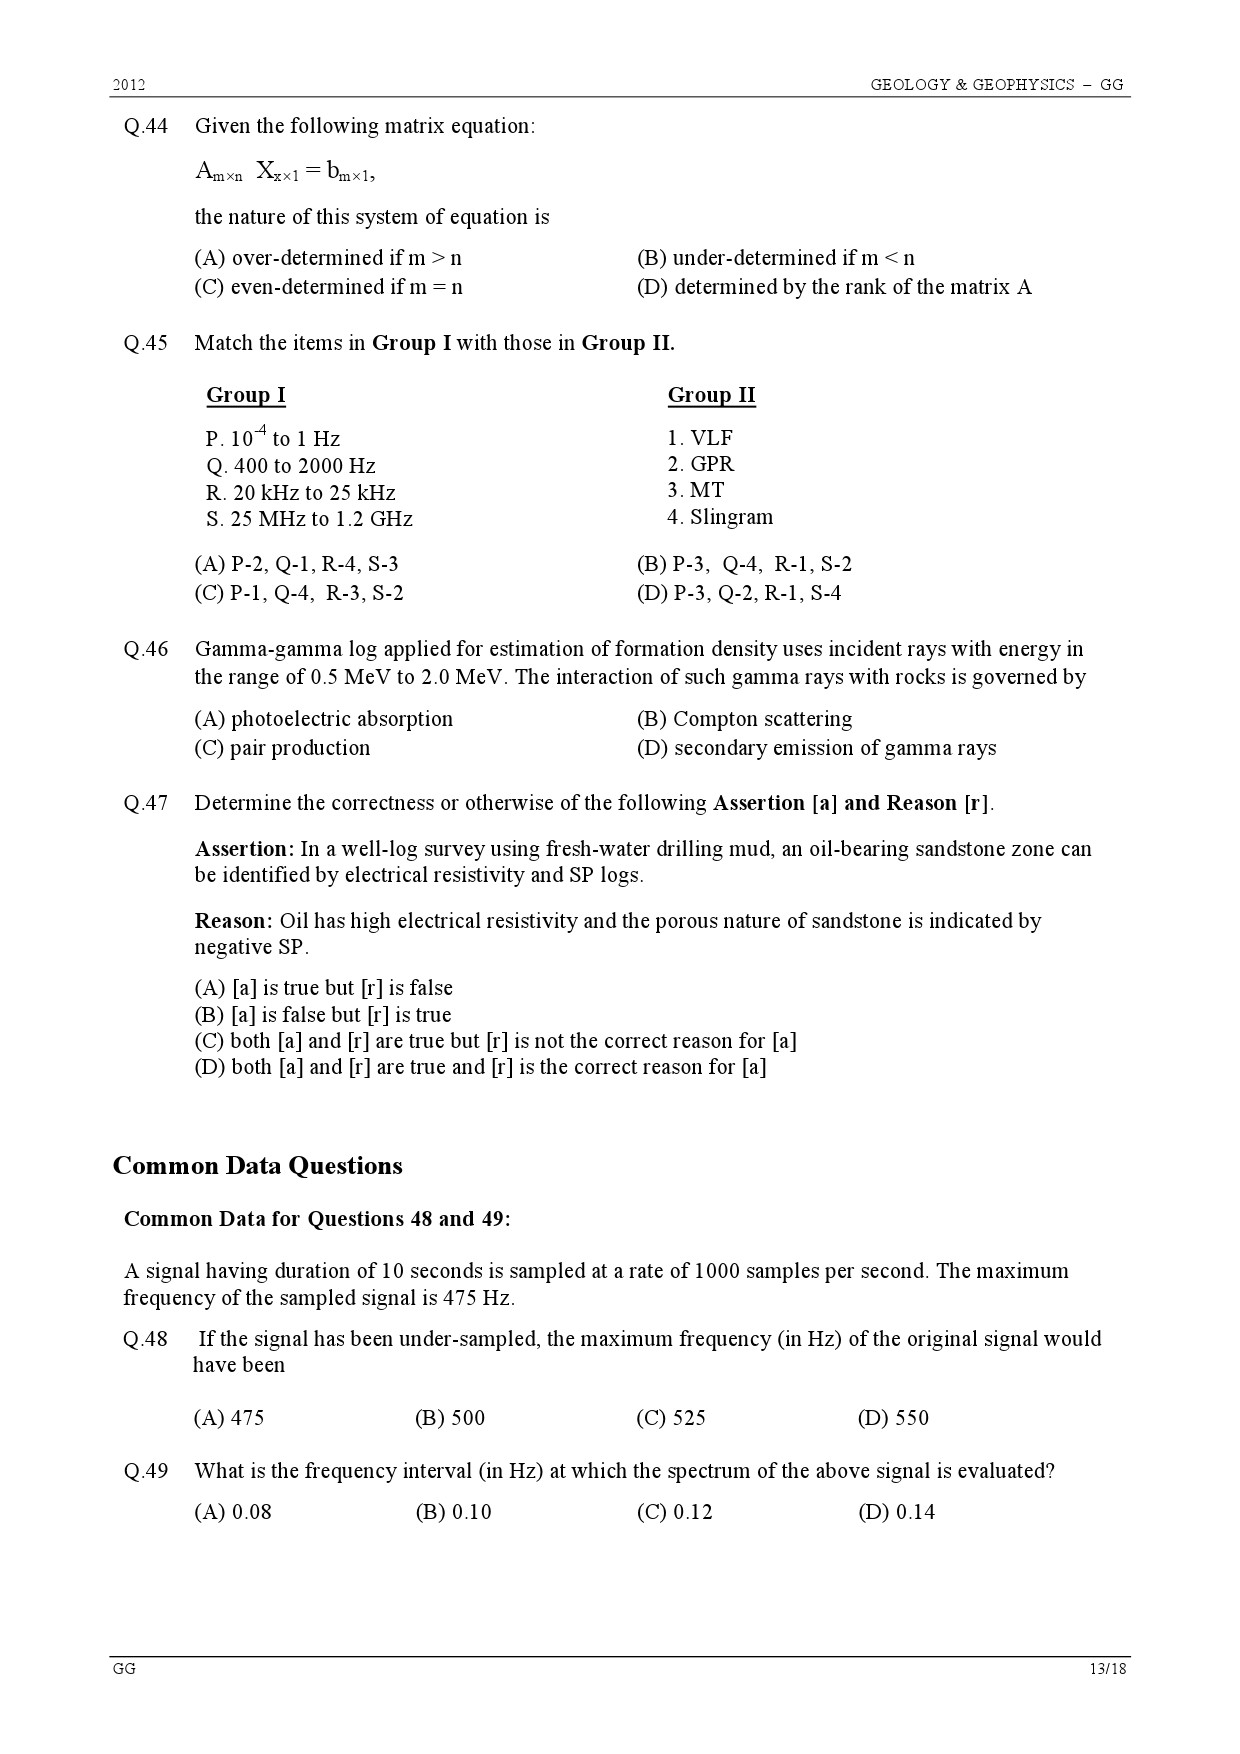 GATE Exam Question Paper 2012 Geology and Geophysics 13